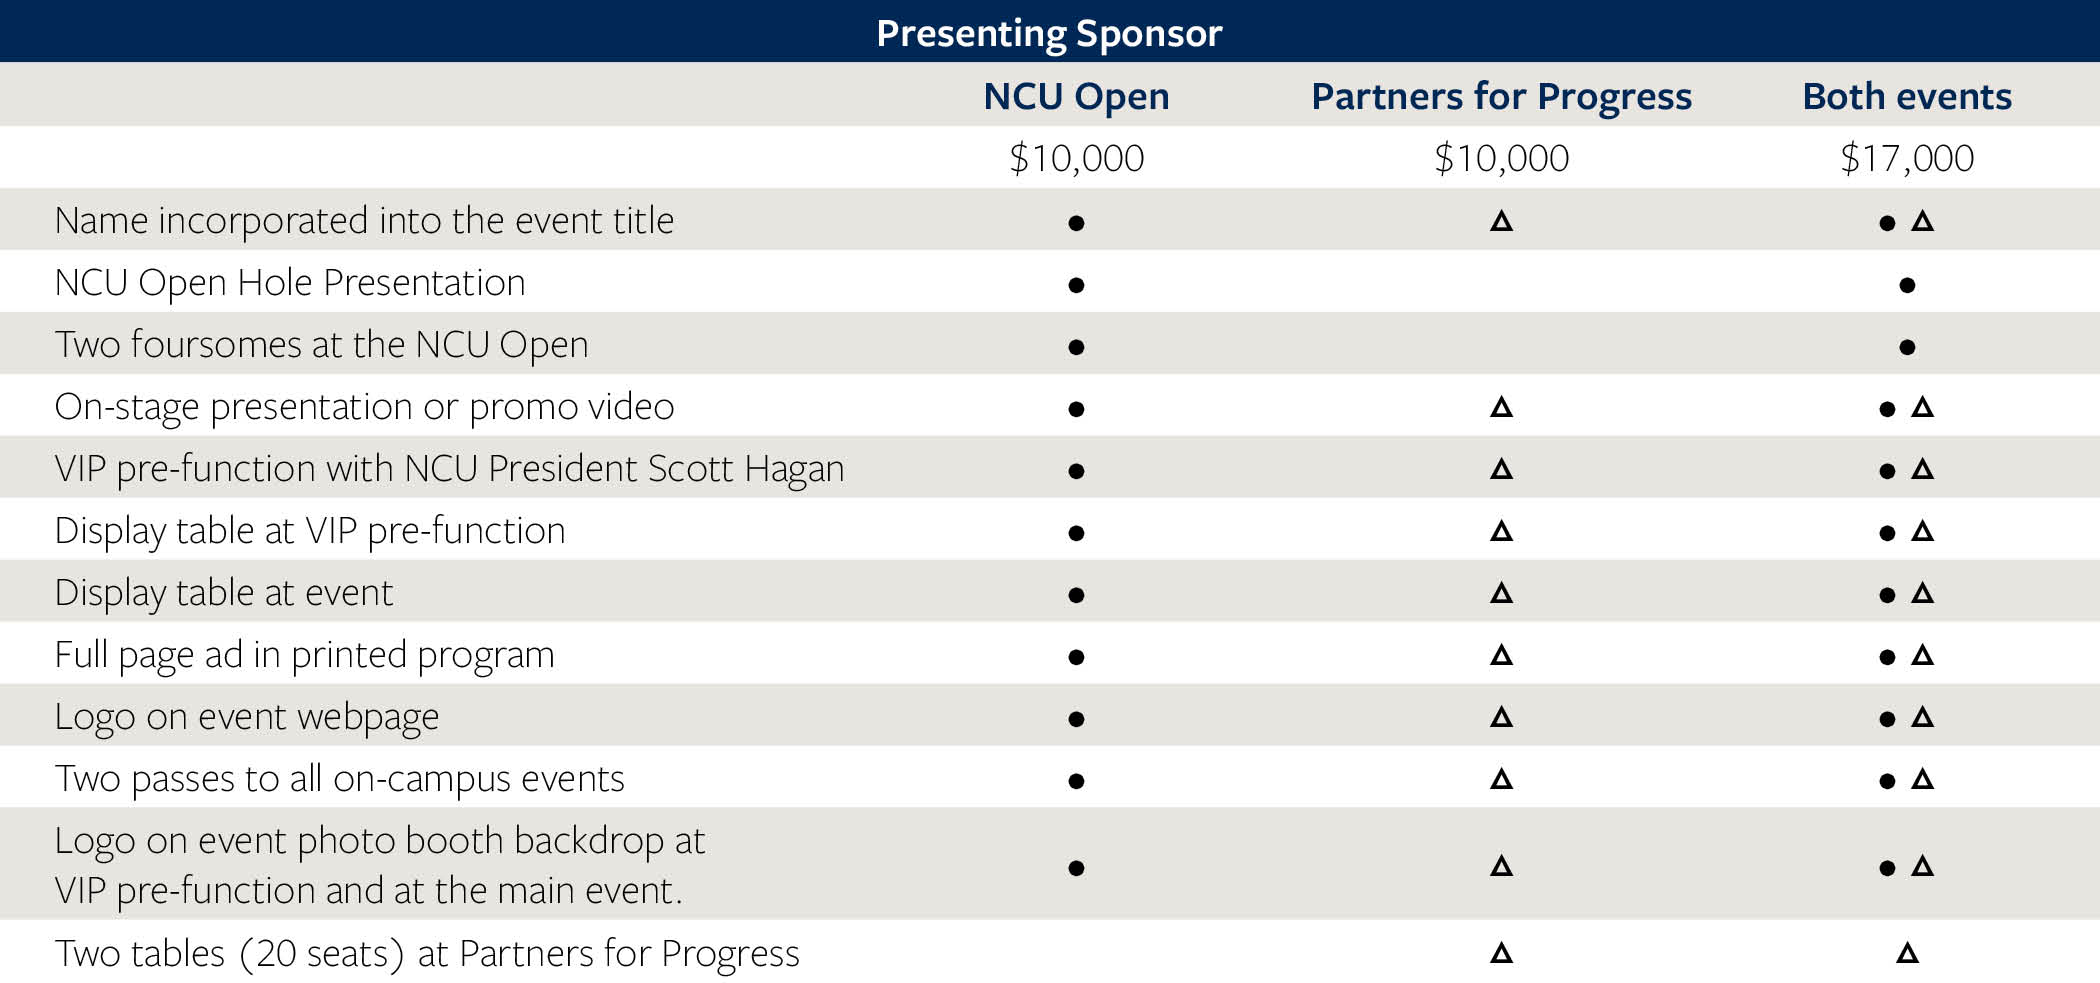 Chart showing the two levels of sponsorship for the NCU Open and Partners for Progress events